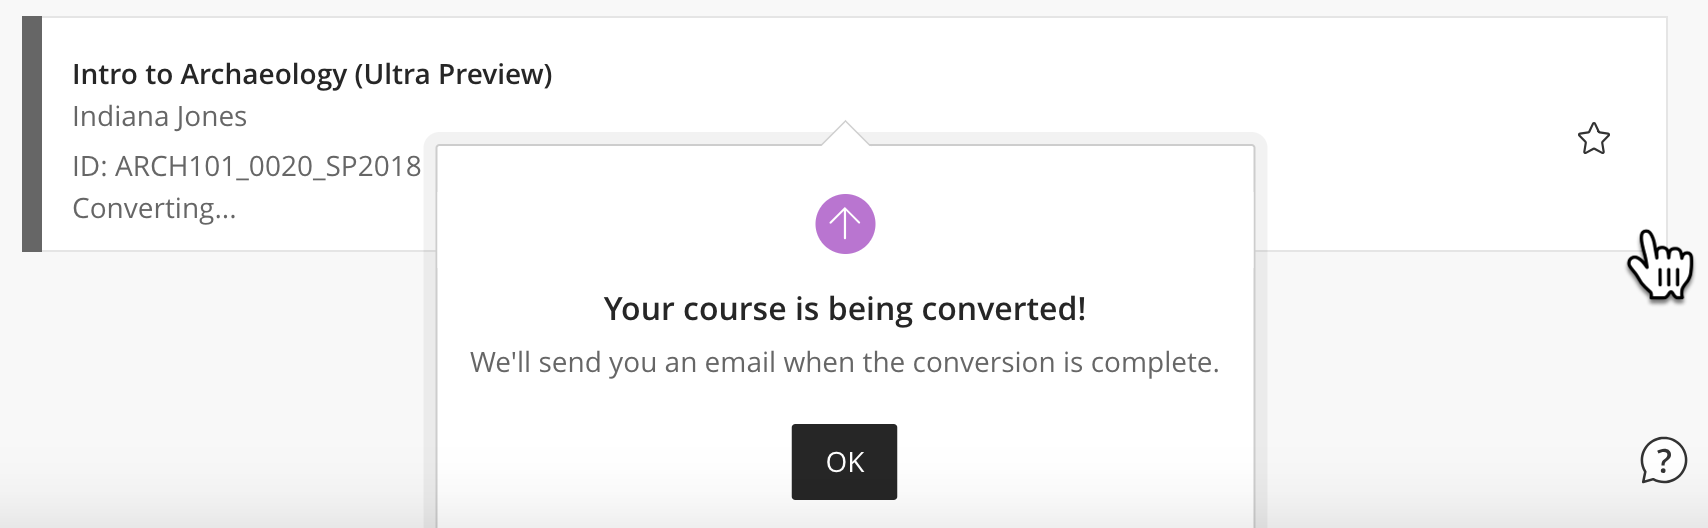 You cannot access your course during the Ultra conversion. 